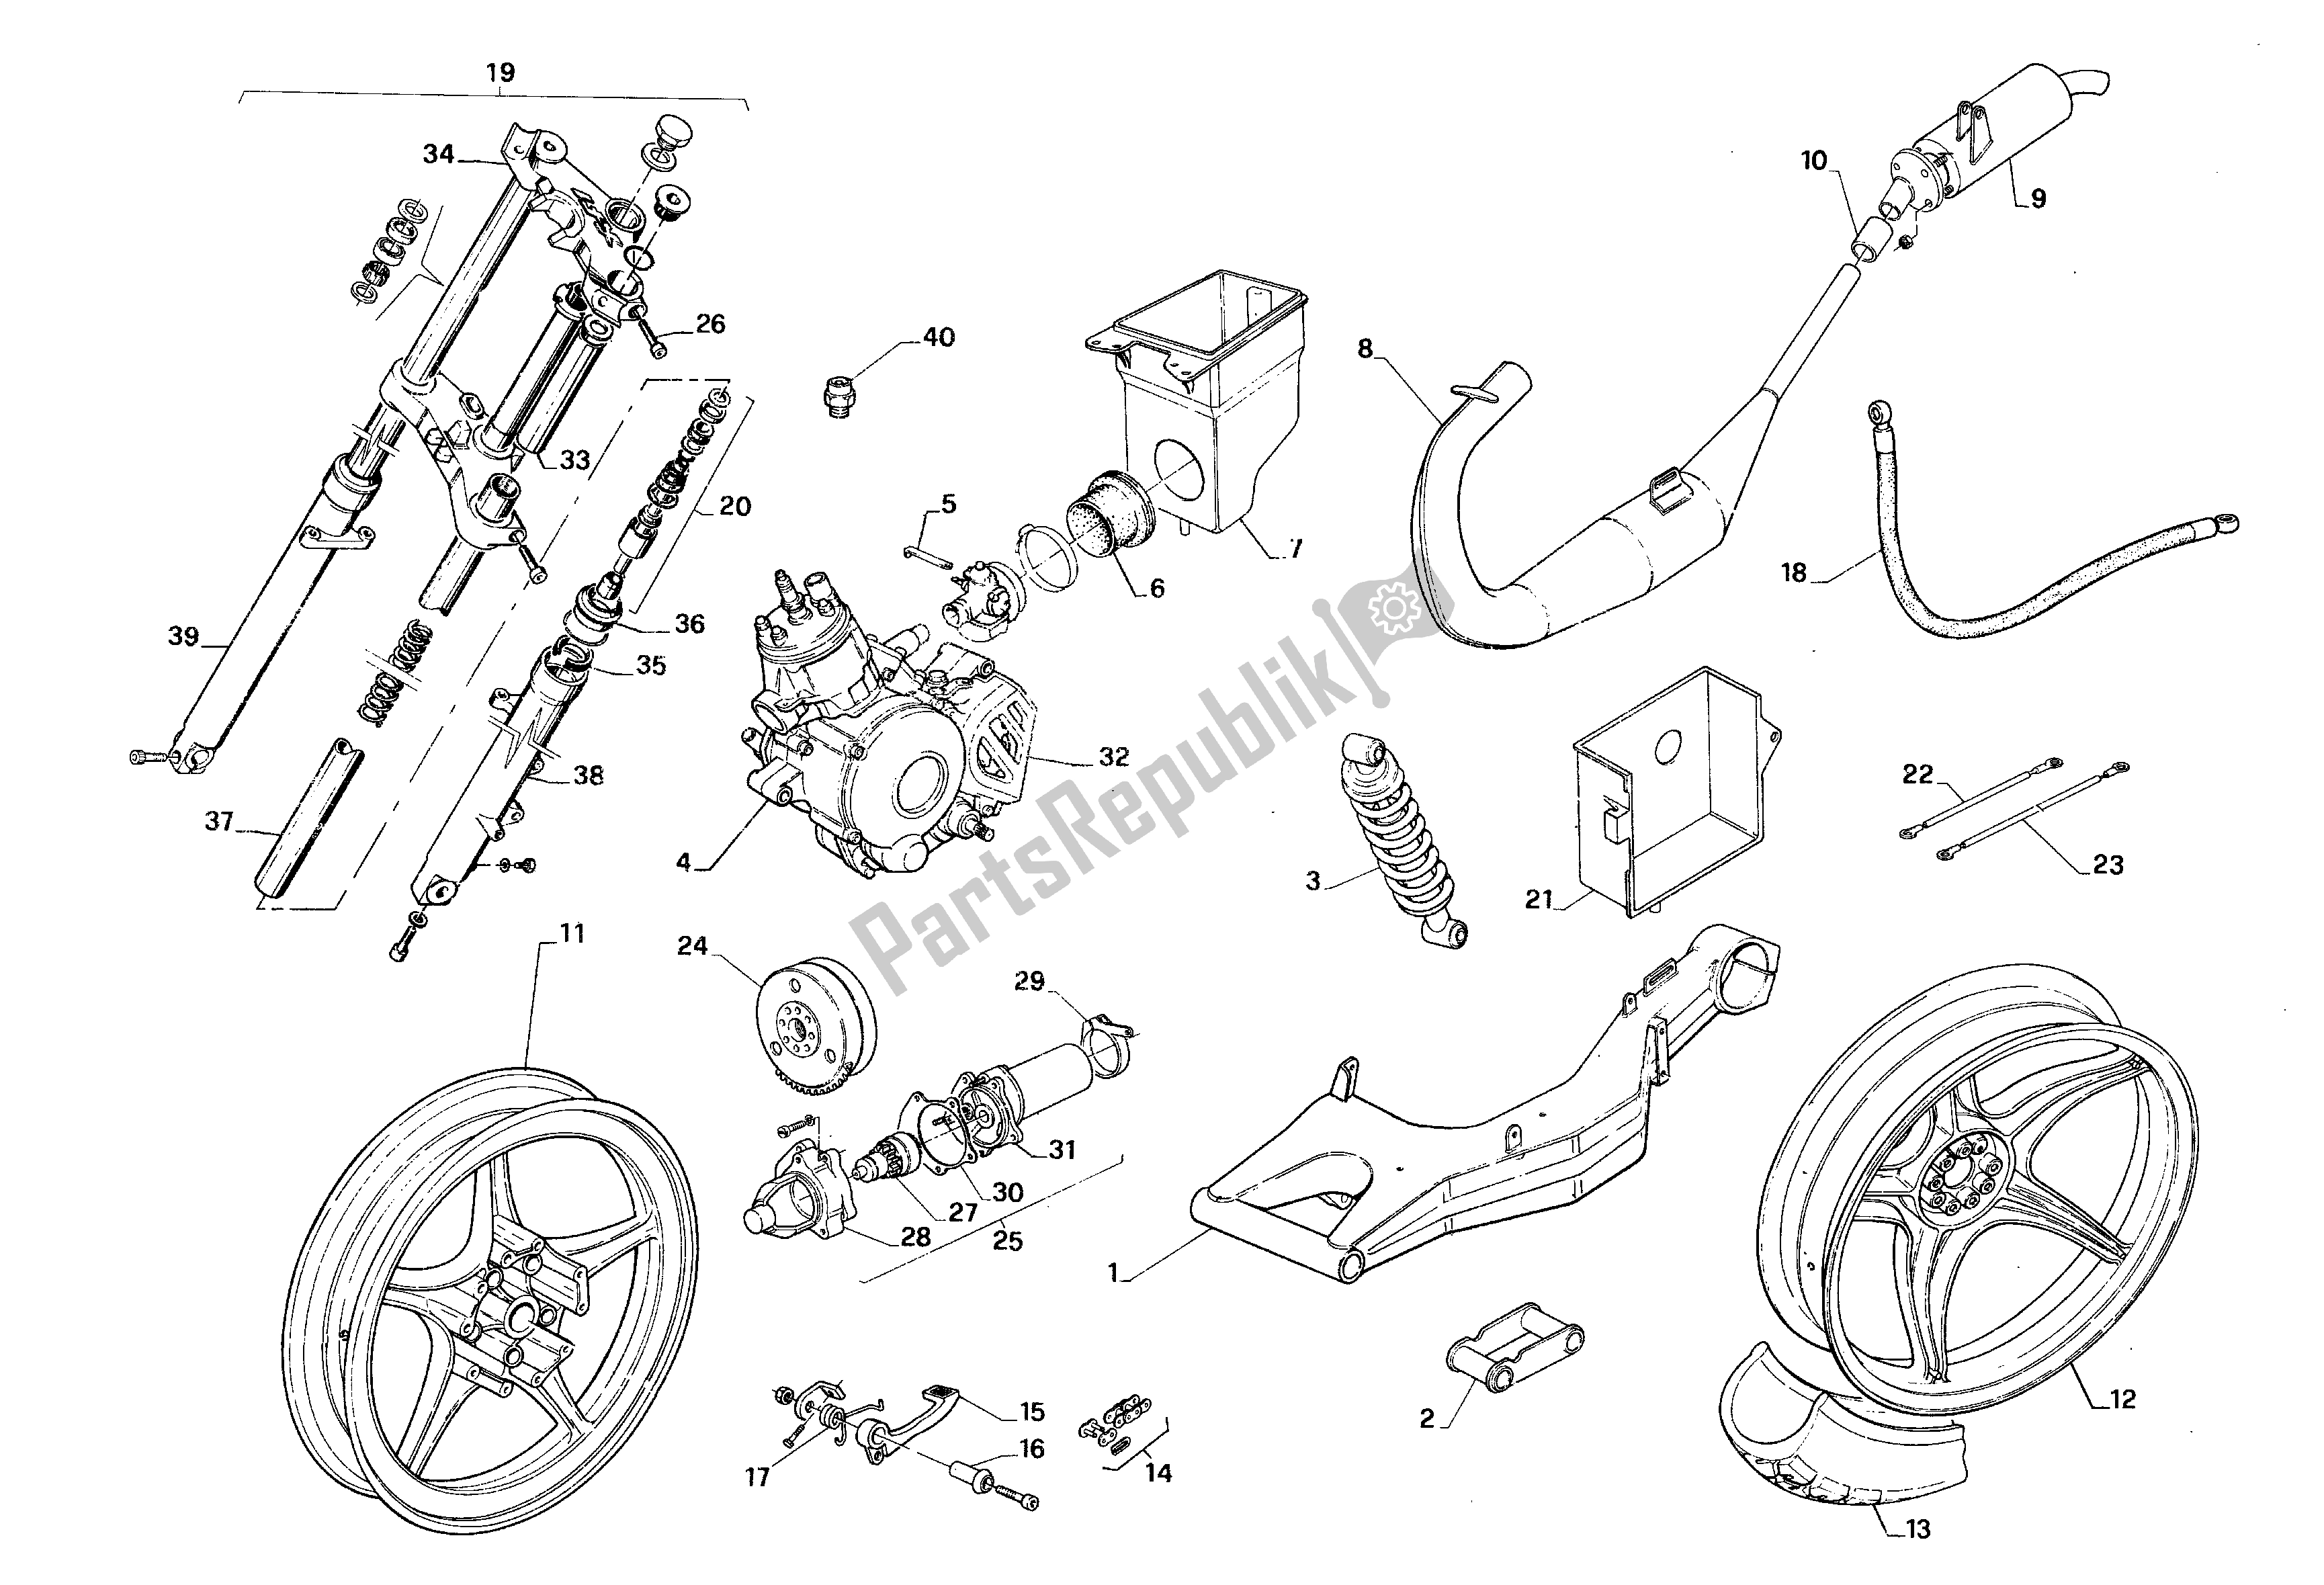 All parts for the Added Drawing N. 315-3 of the Aprilia AF1 50 1990